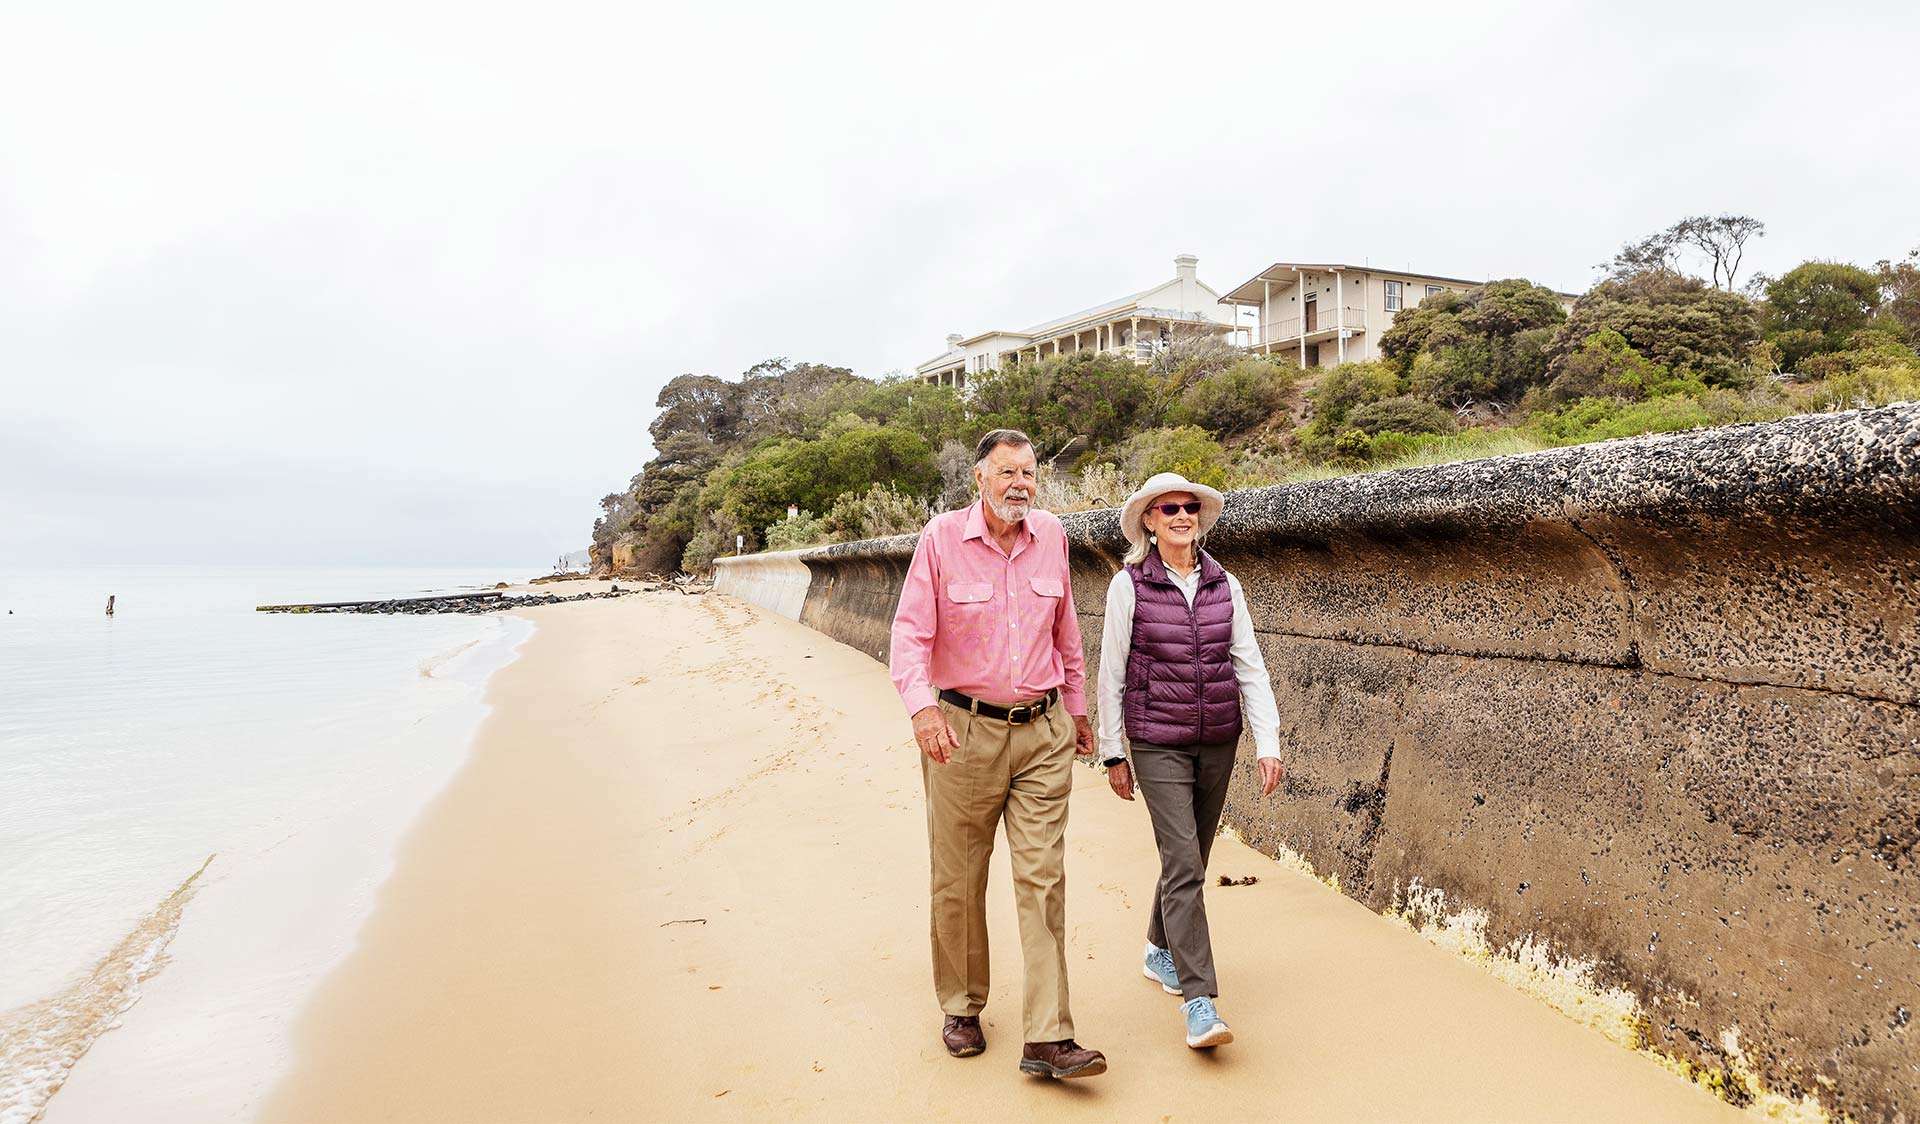 An elderly couple walking along the beach together at the Quarantine Station in Point Nepean National Park